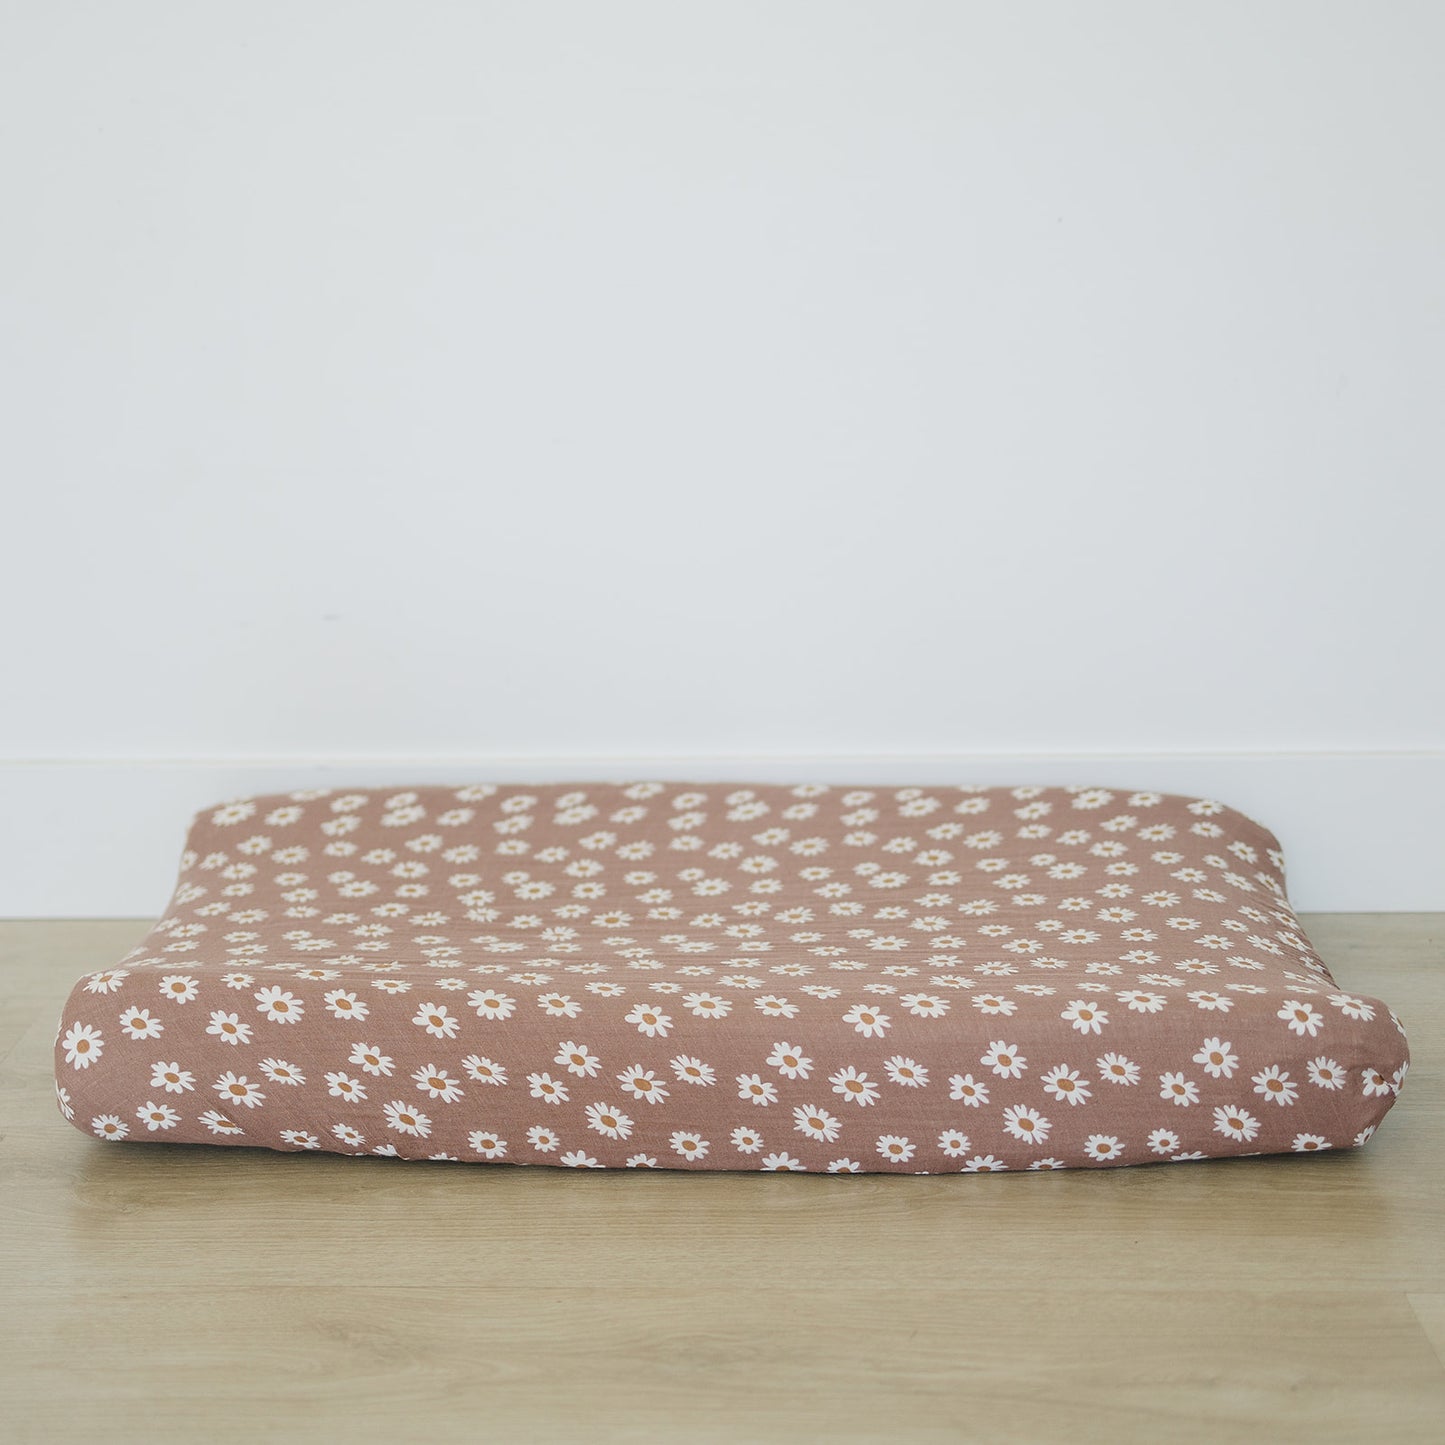 Daisy Dream Muslin Changing Pad Cover